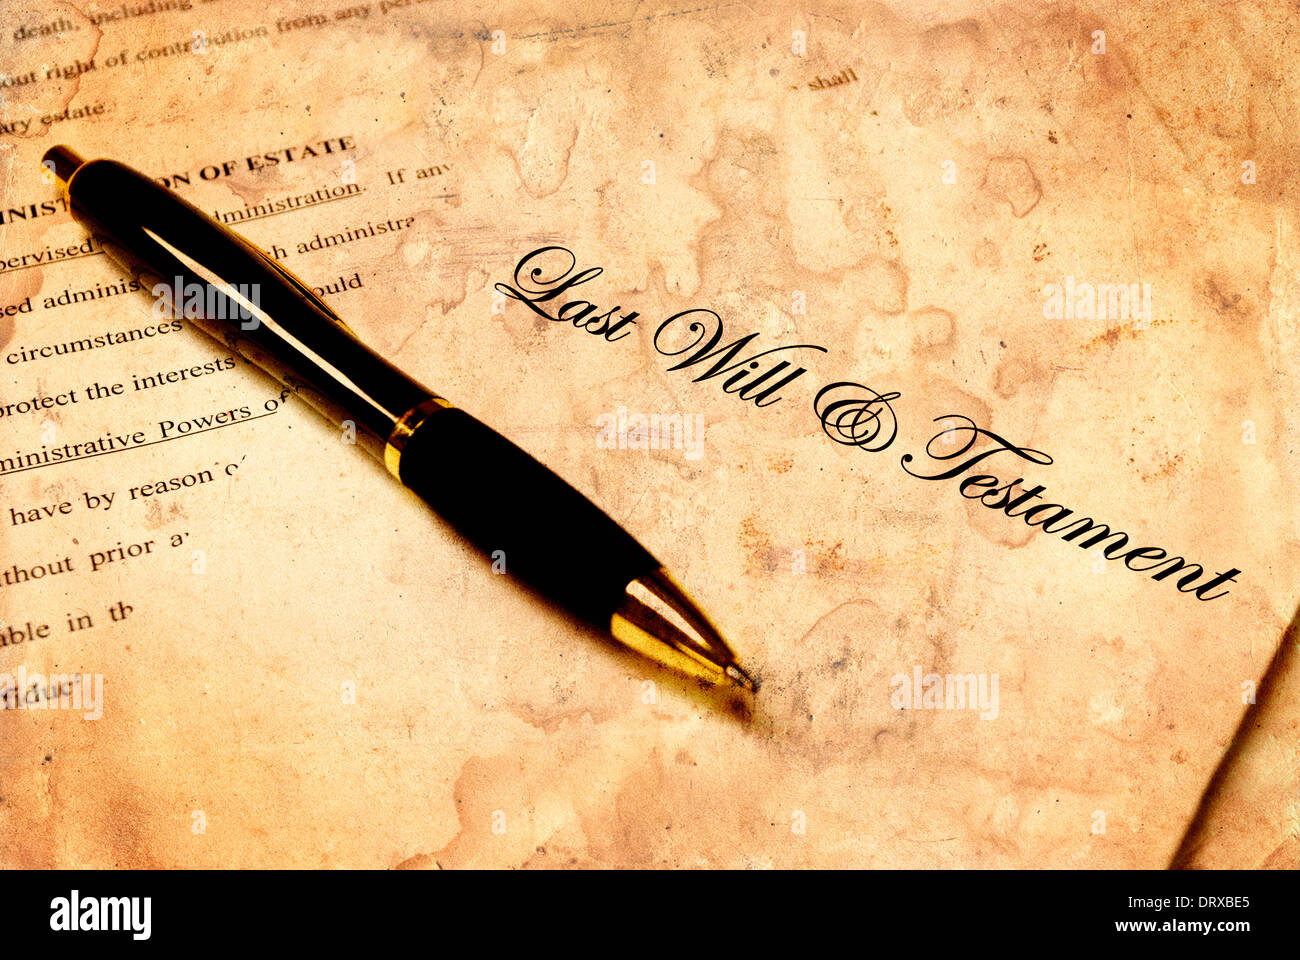 Pen laying on top of a Will for estate planning Stock Photo